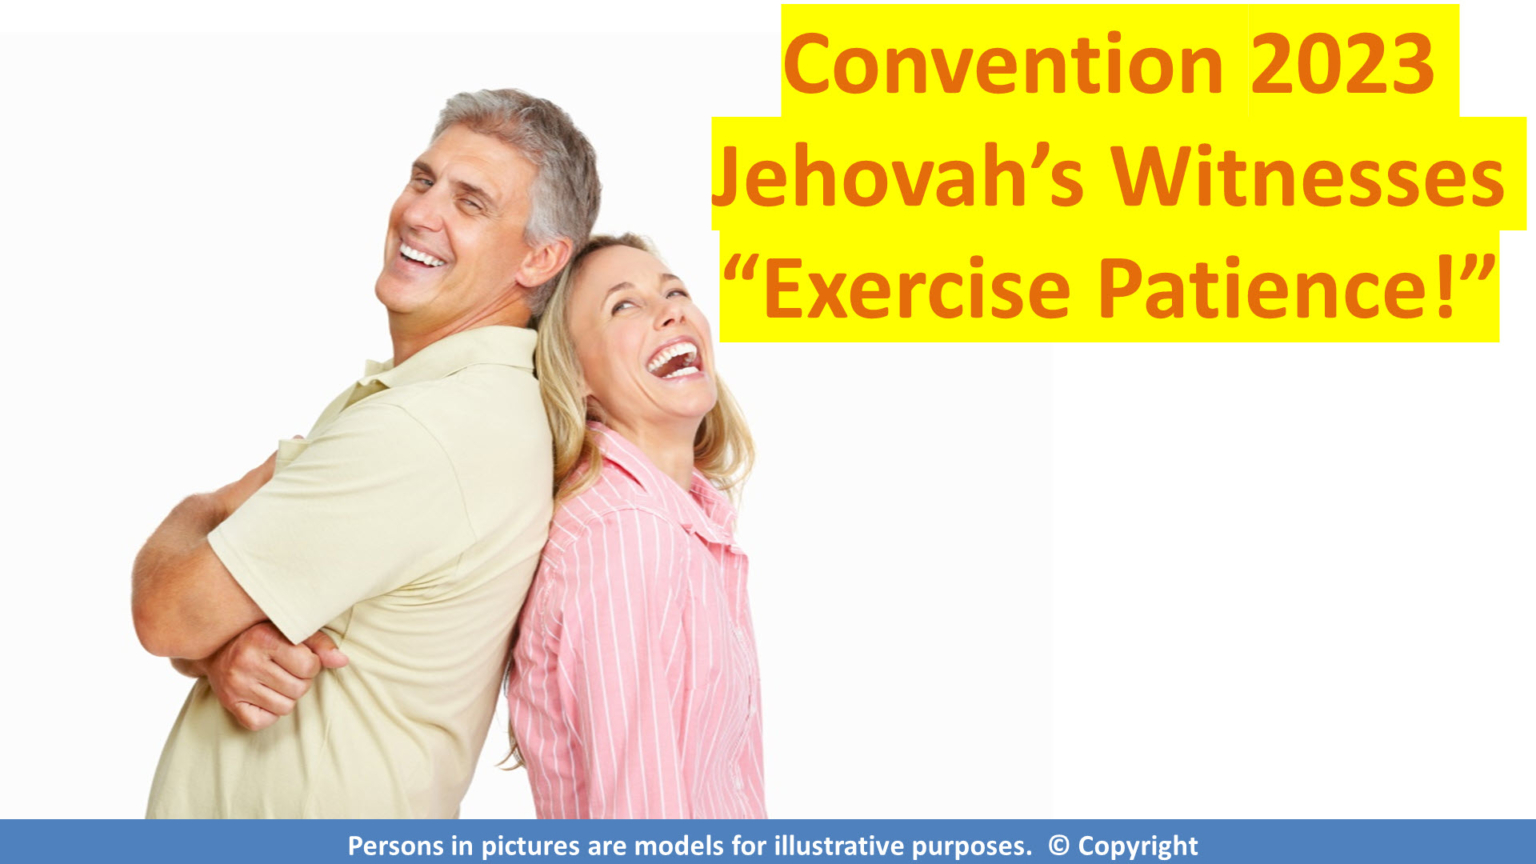 Convention Jehovah's Witnesses 2023 "Exercise Patience!" · 247info.info